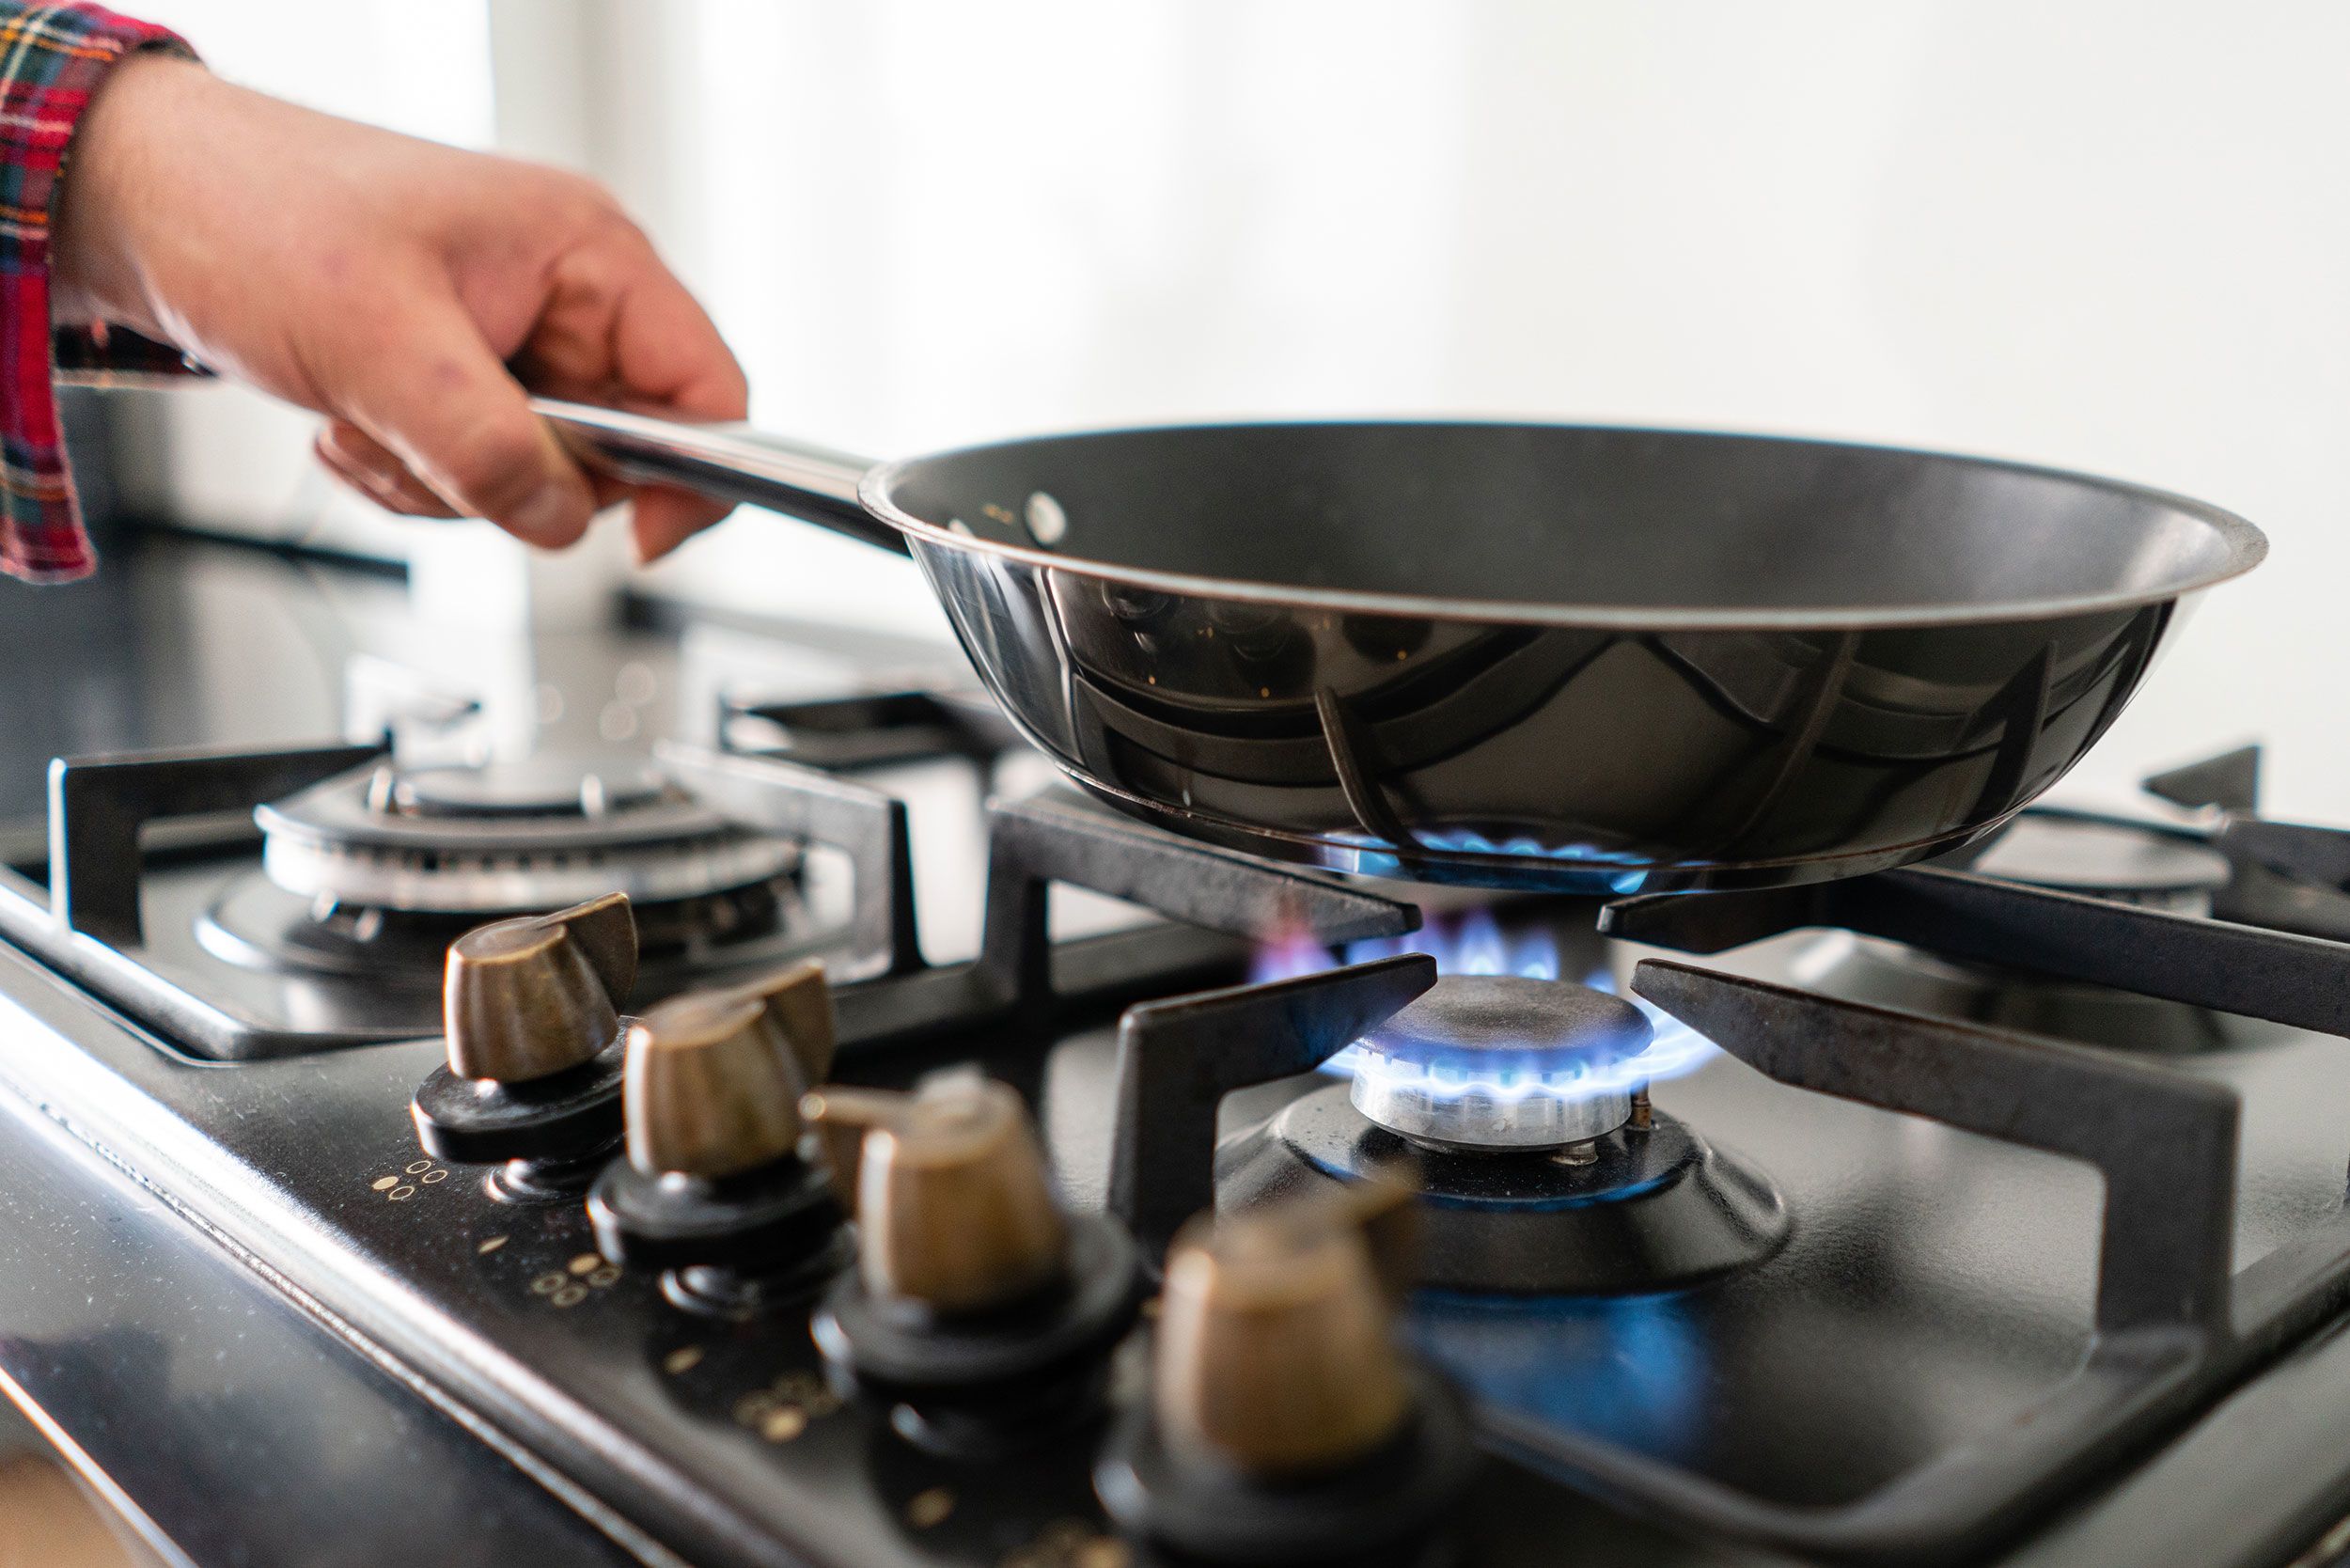 Gas stoves impact climate change and public health, study shows